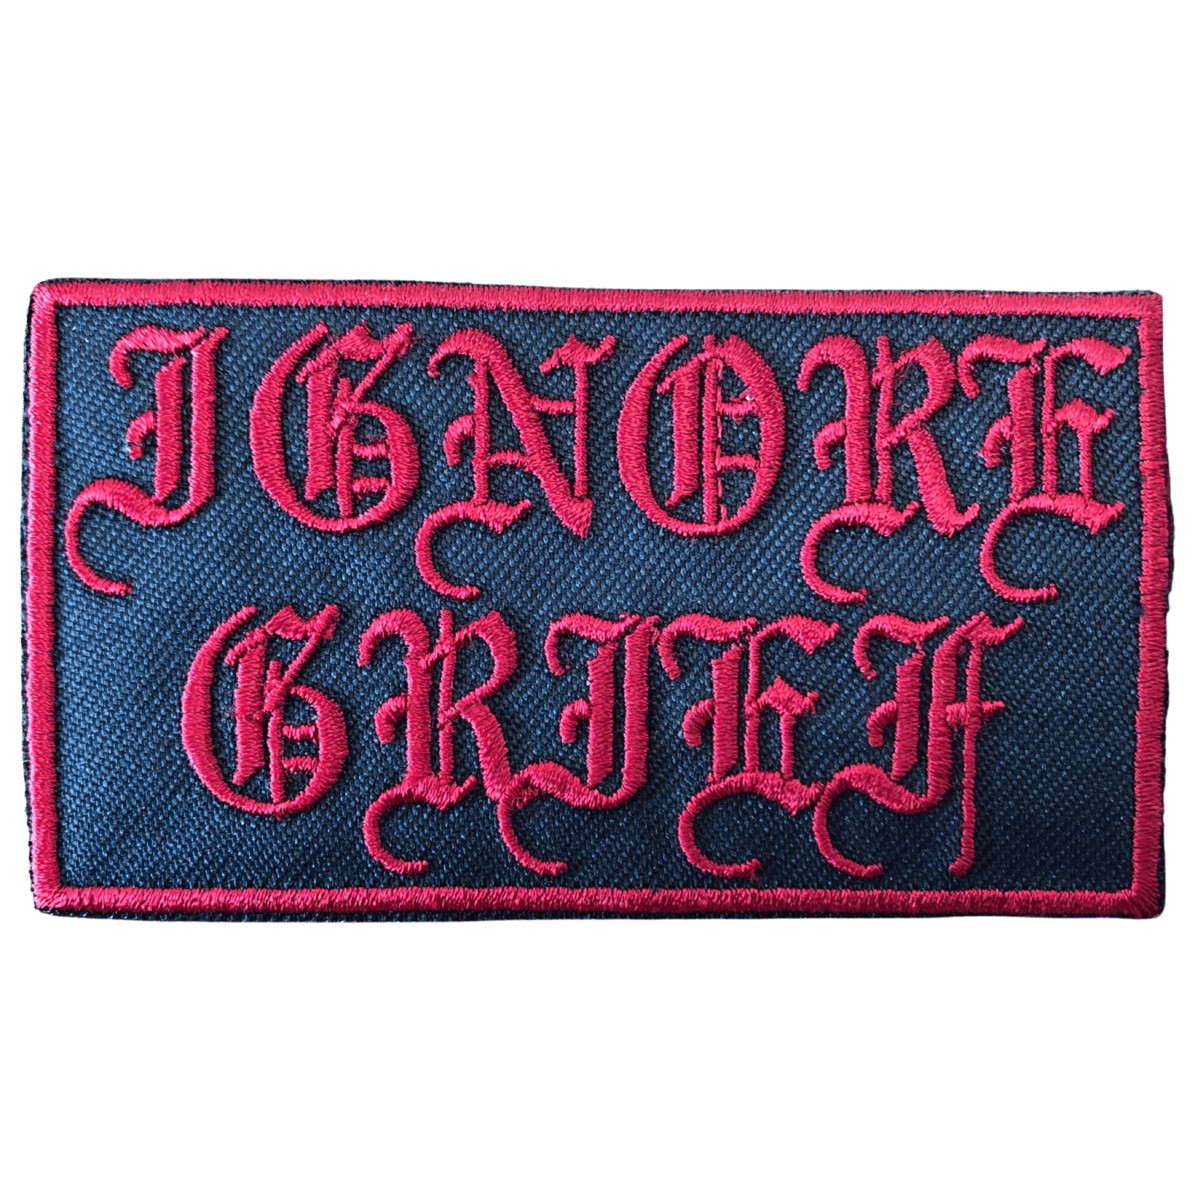 Ignore Grief (patch)